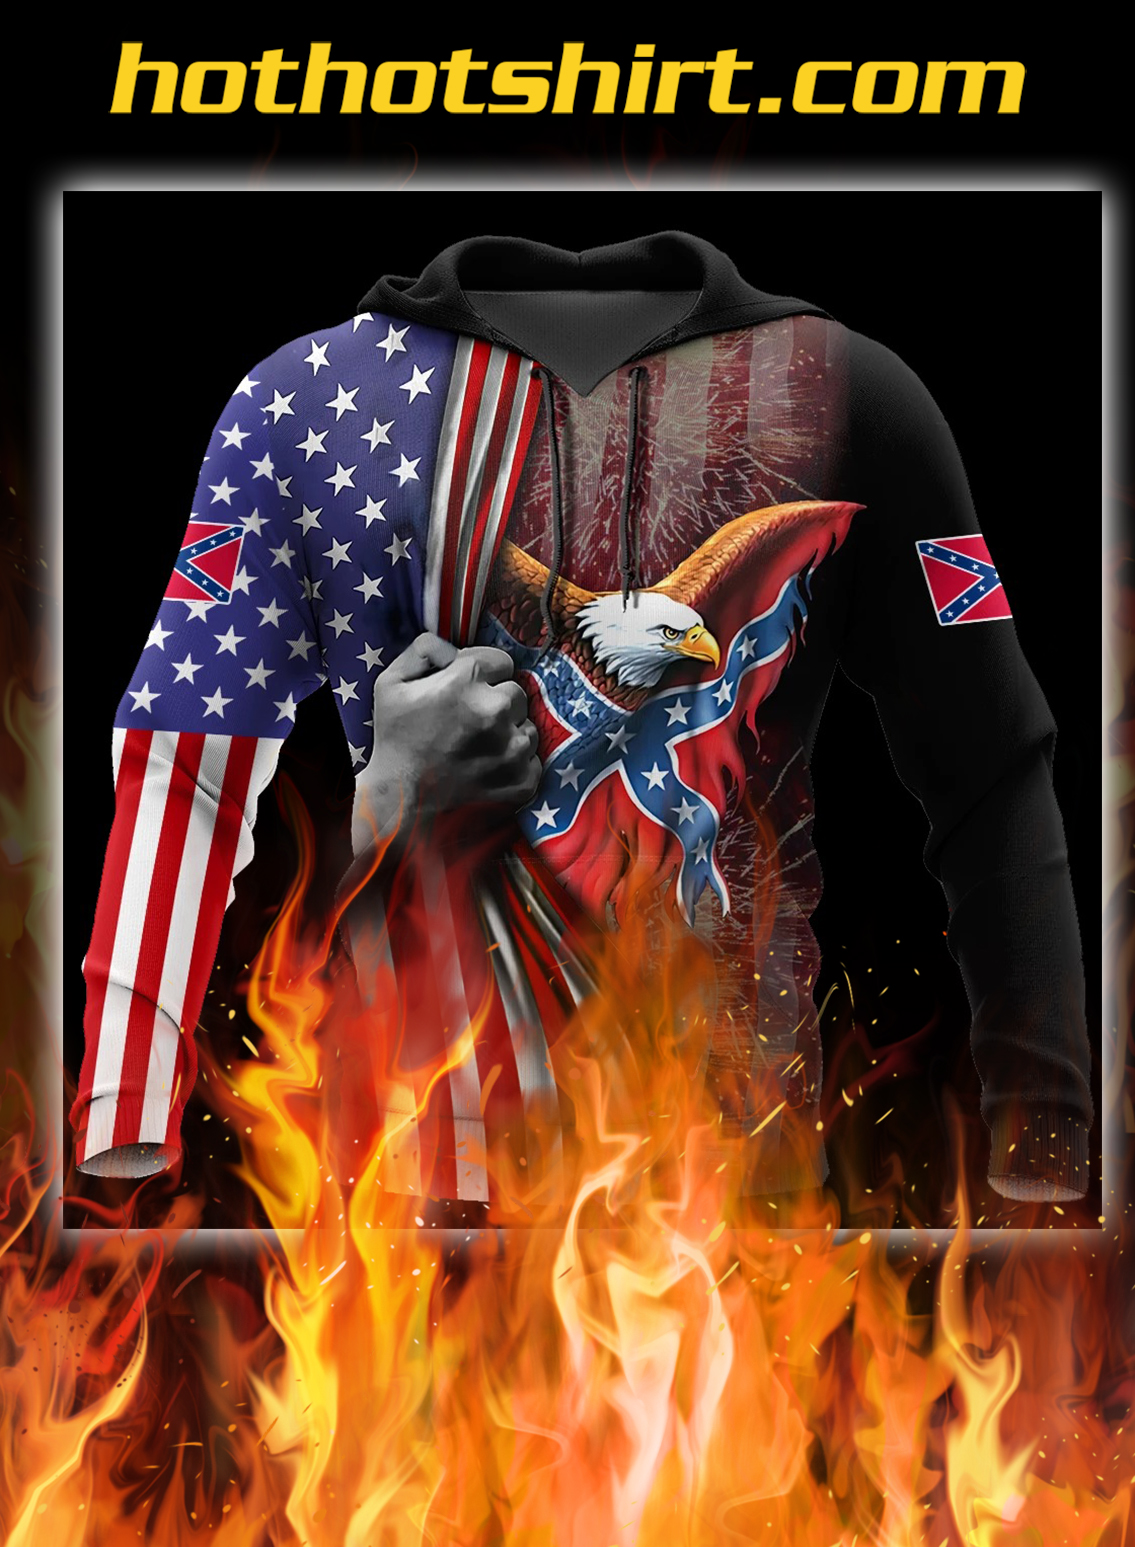 Confederate states of america eagle 3d all over printed hoodie and shirt